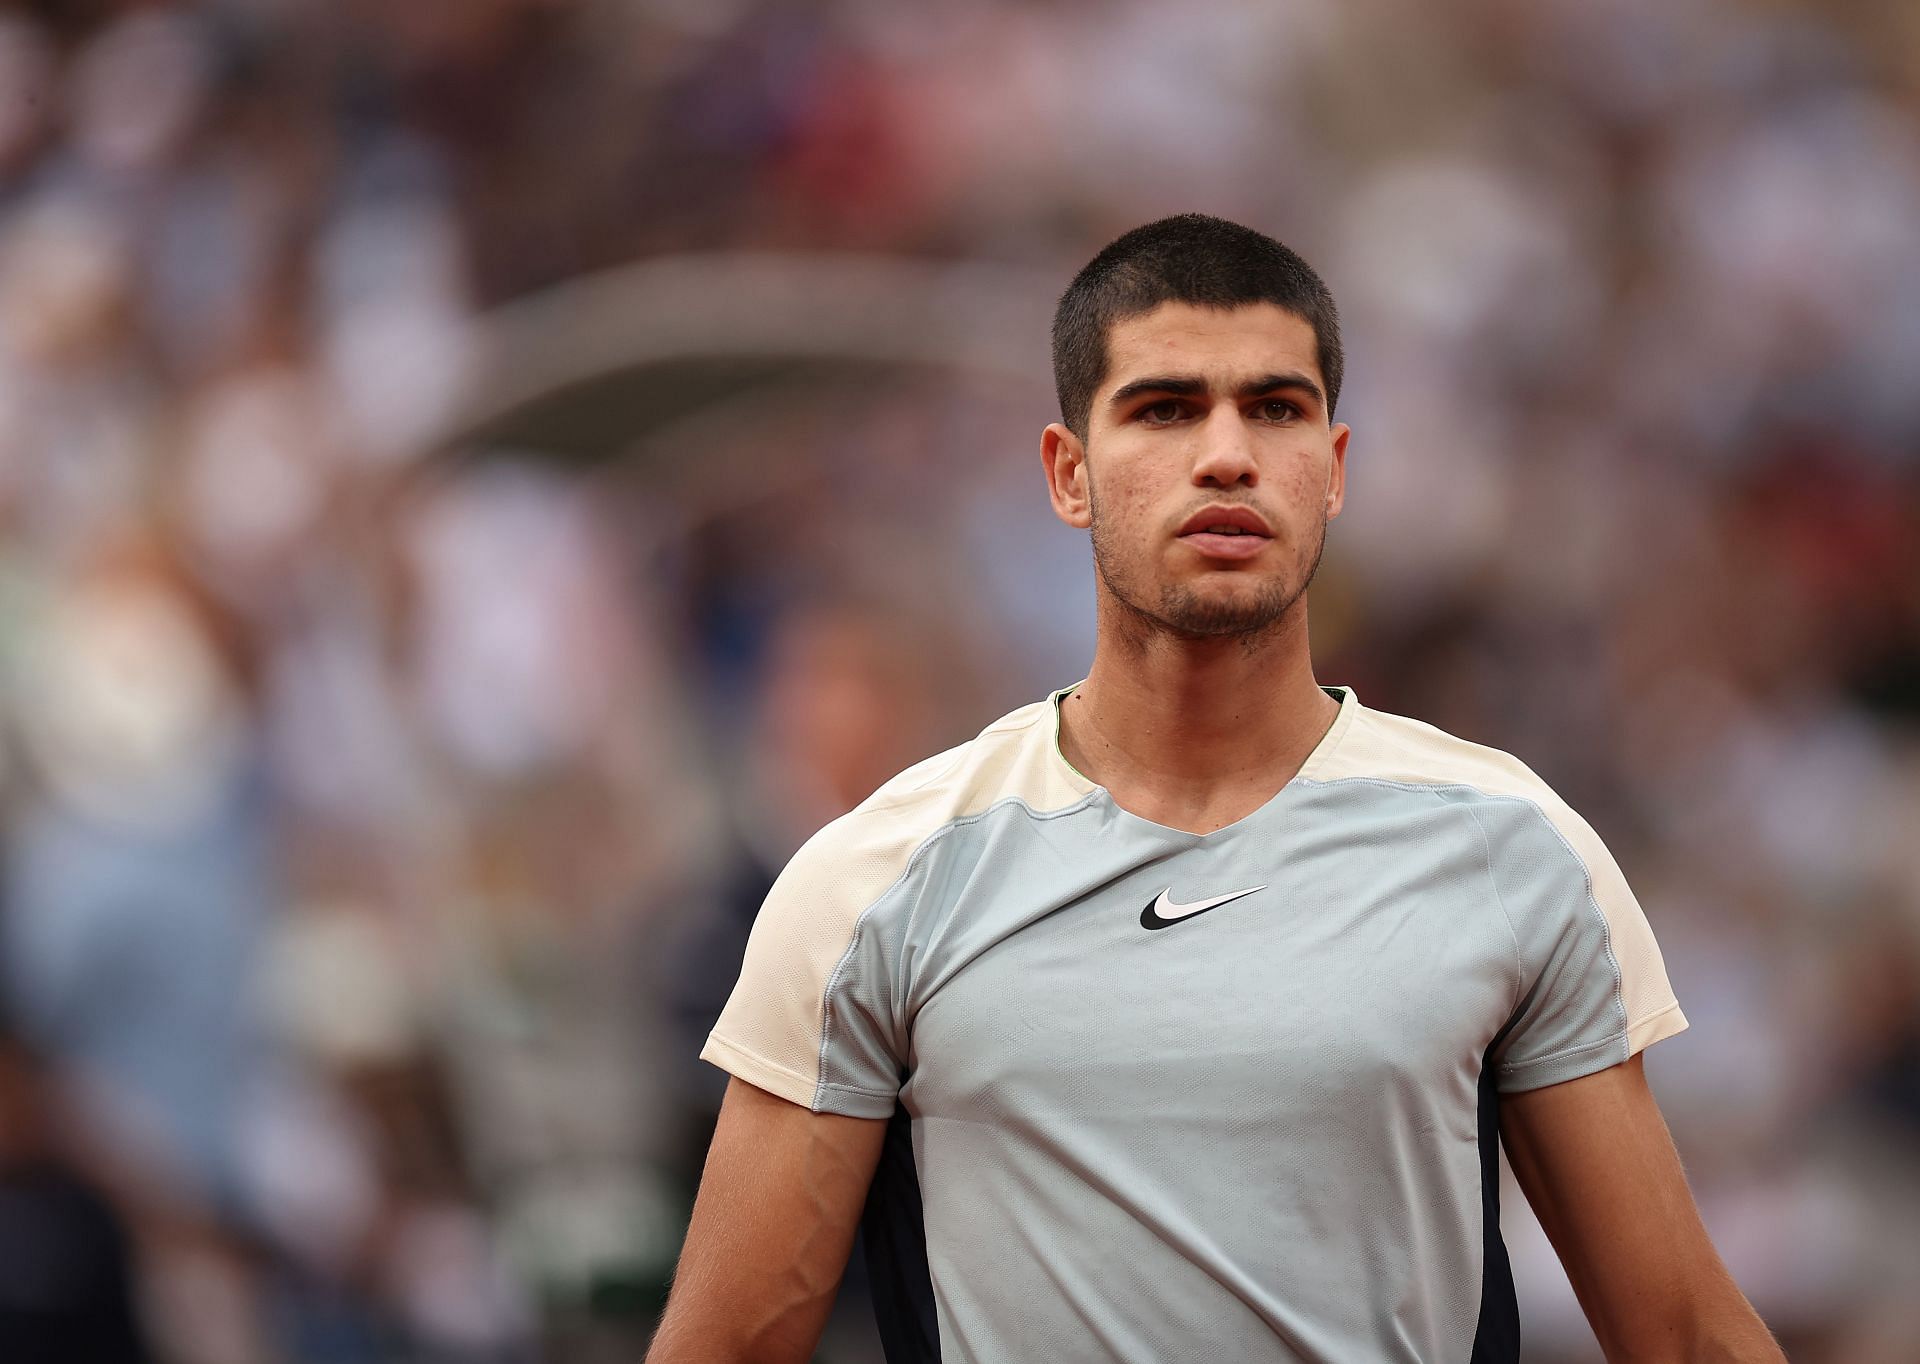 TUNNEL VISION: Nineteen-year-old Carlos Alcaraz, among the men-to-beat at Roland Garros, says that he is trying to focus just on his matches amid the attention and pressure